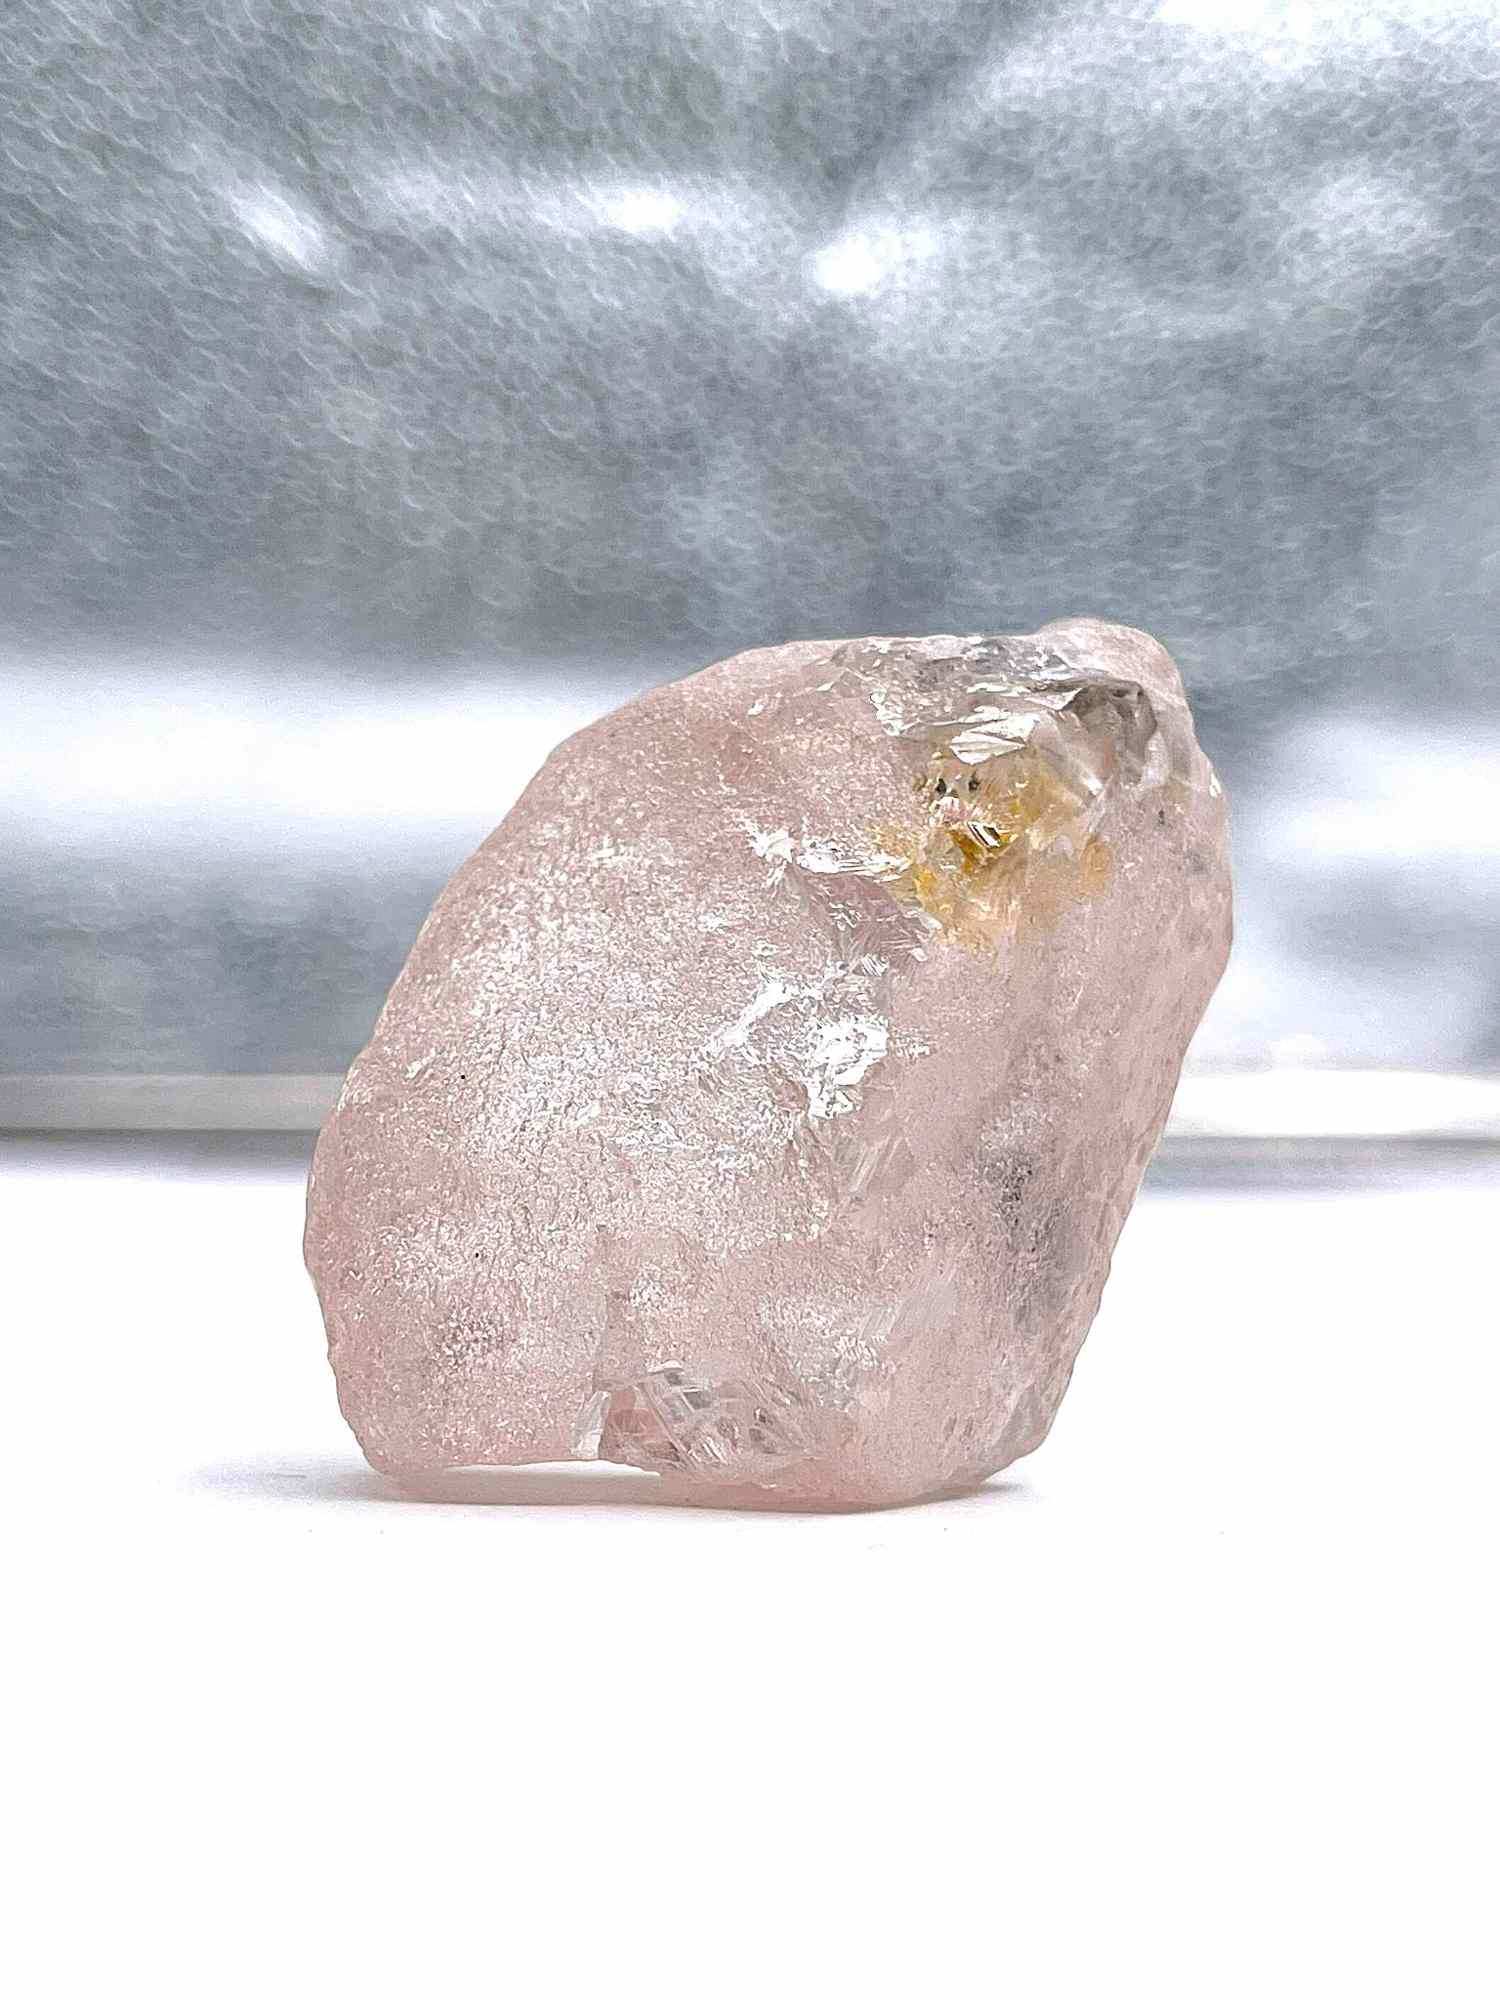 170-Carat Pink Diamond May Be Largest Gem of its Type Found in 300 Years